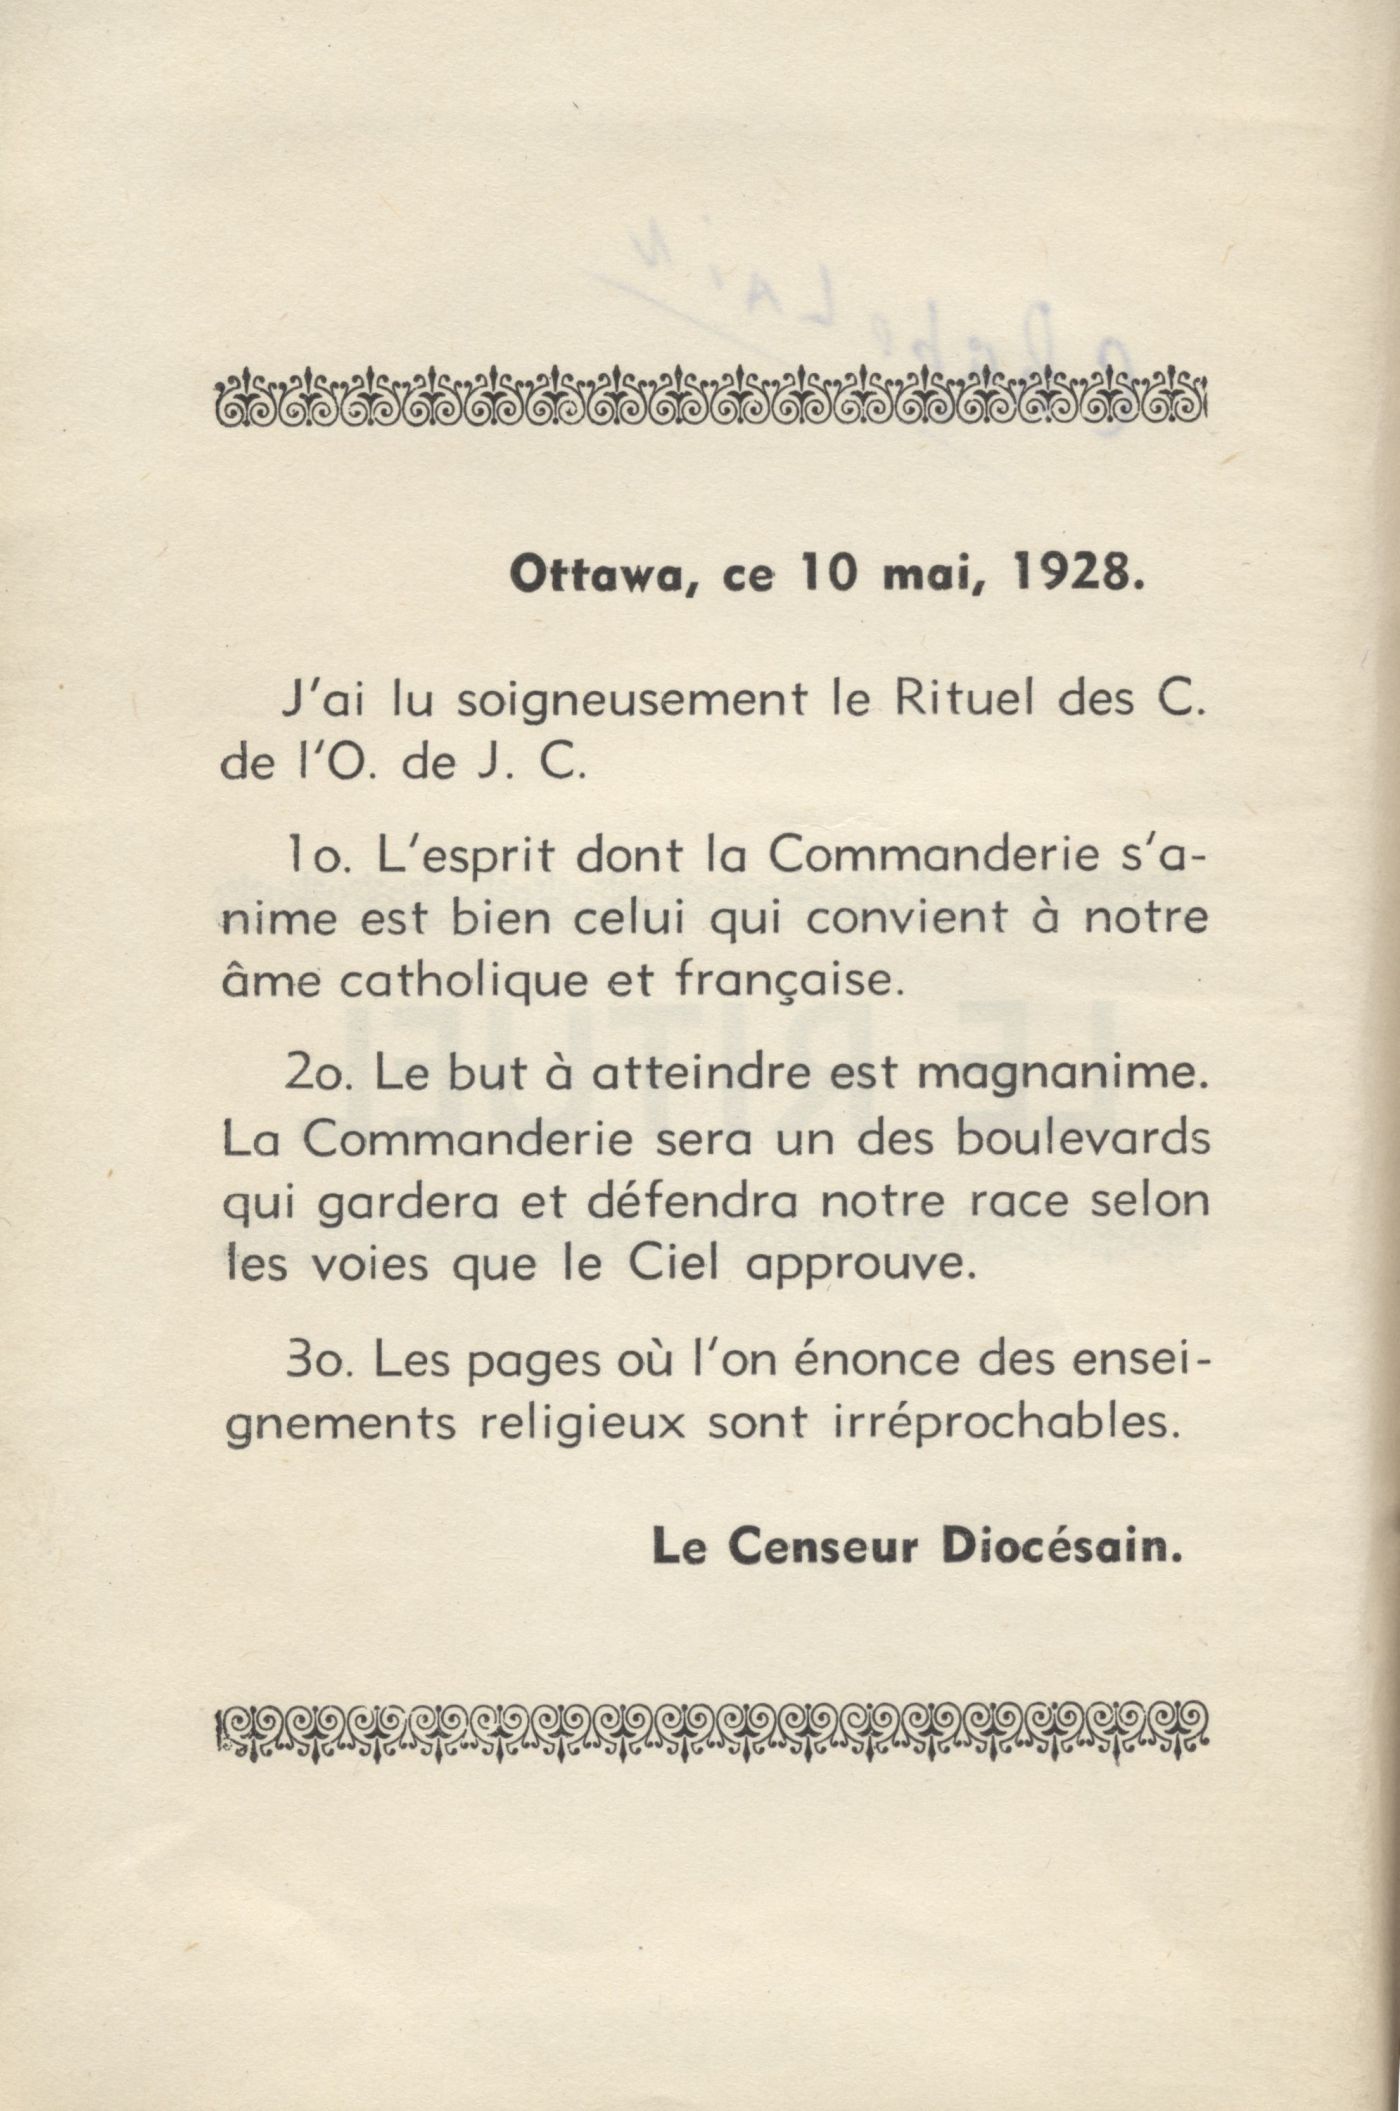 Document printed in French. The front cover has a title, positioned between two decorative borders above and below the words. The word “chapelain” is handwritten in blue ink at the top of the page. It includes three remarks by the diocesan censor, and the date, as well as the detailed plan of a room and the place occupied by various participants.